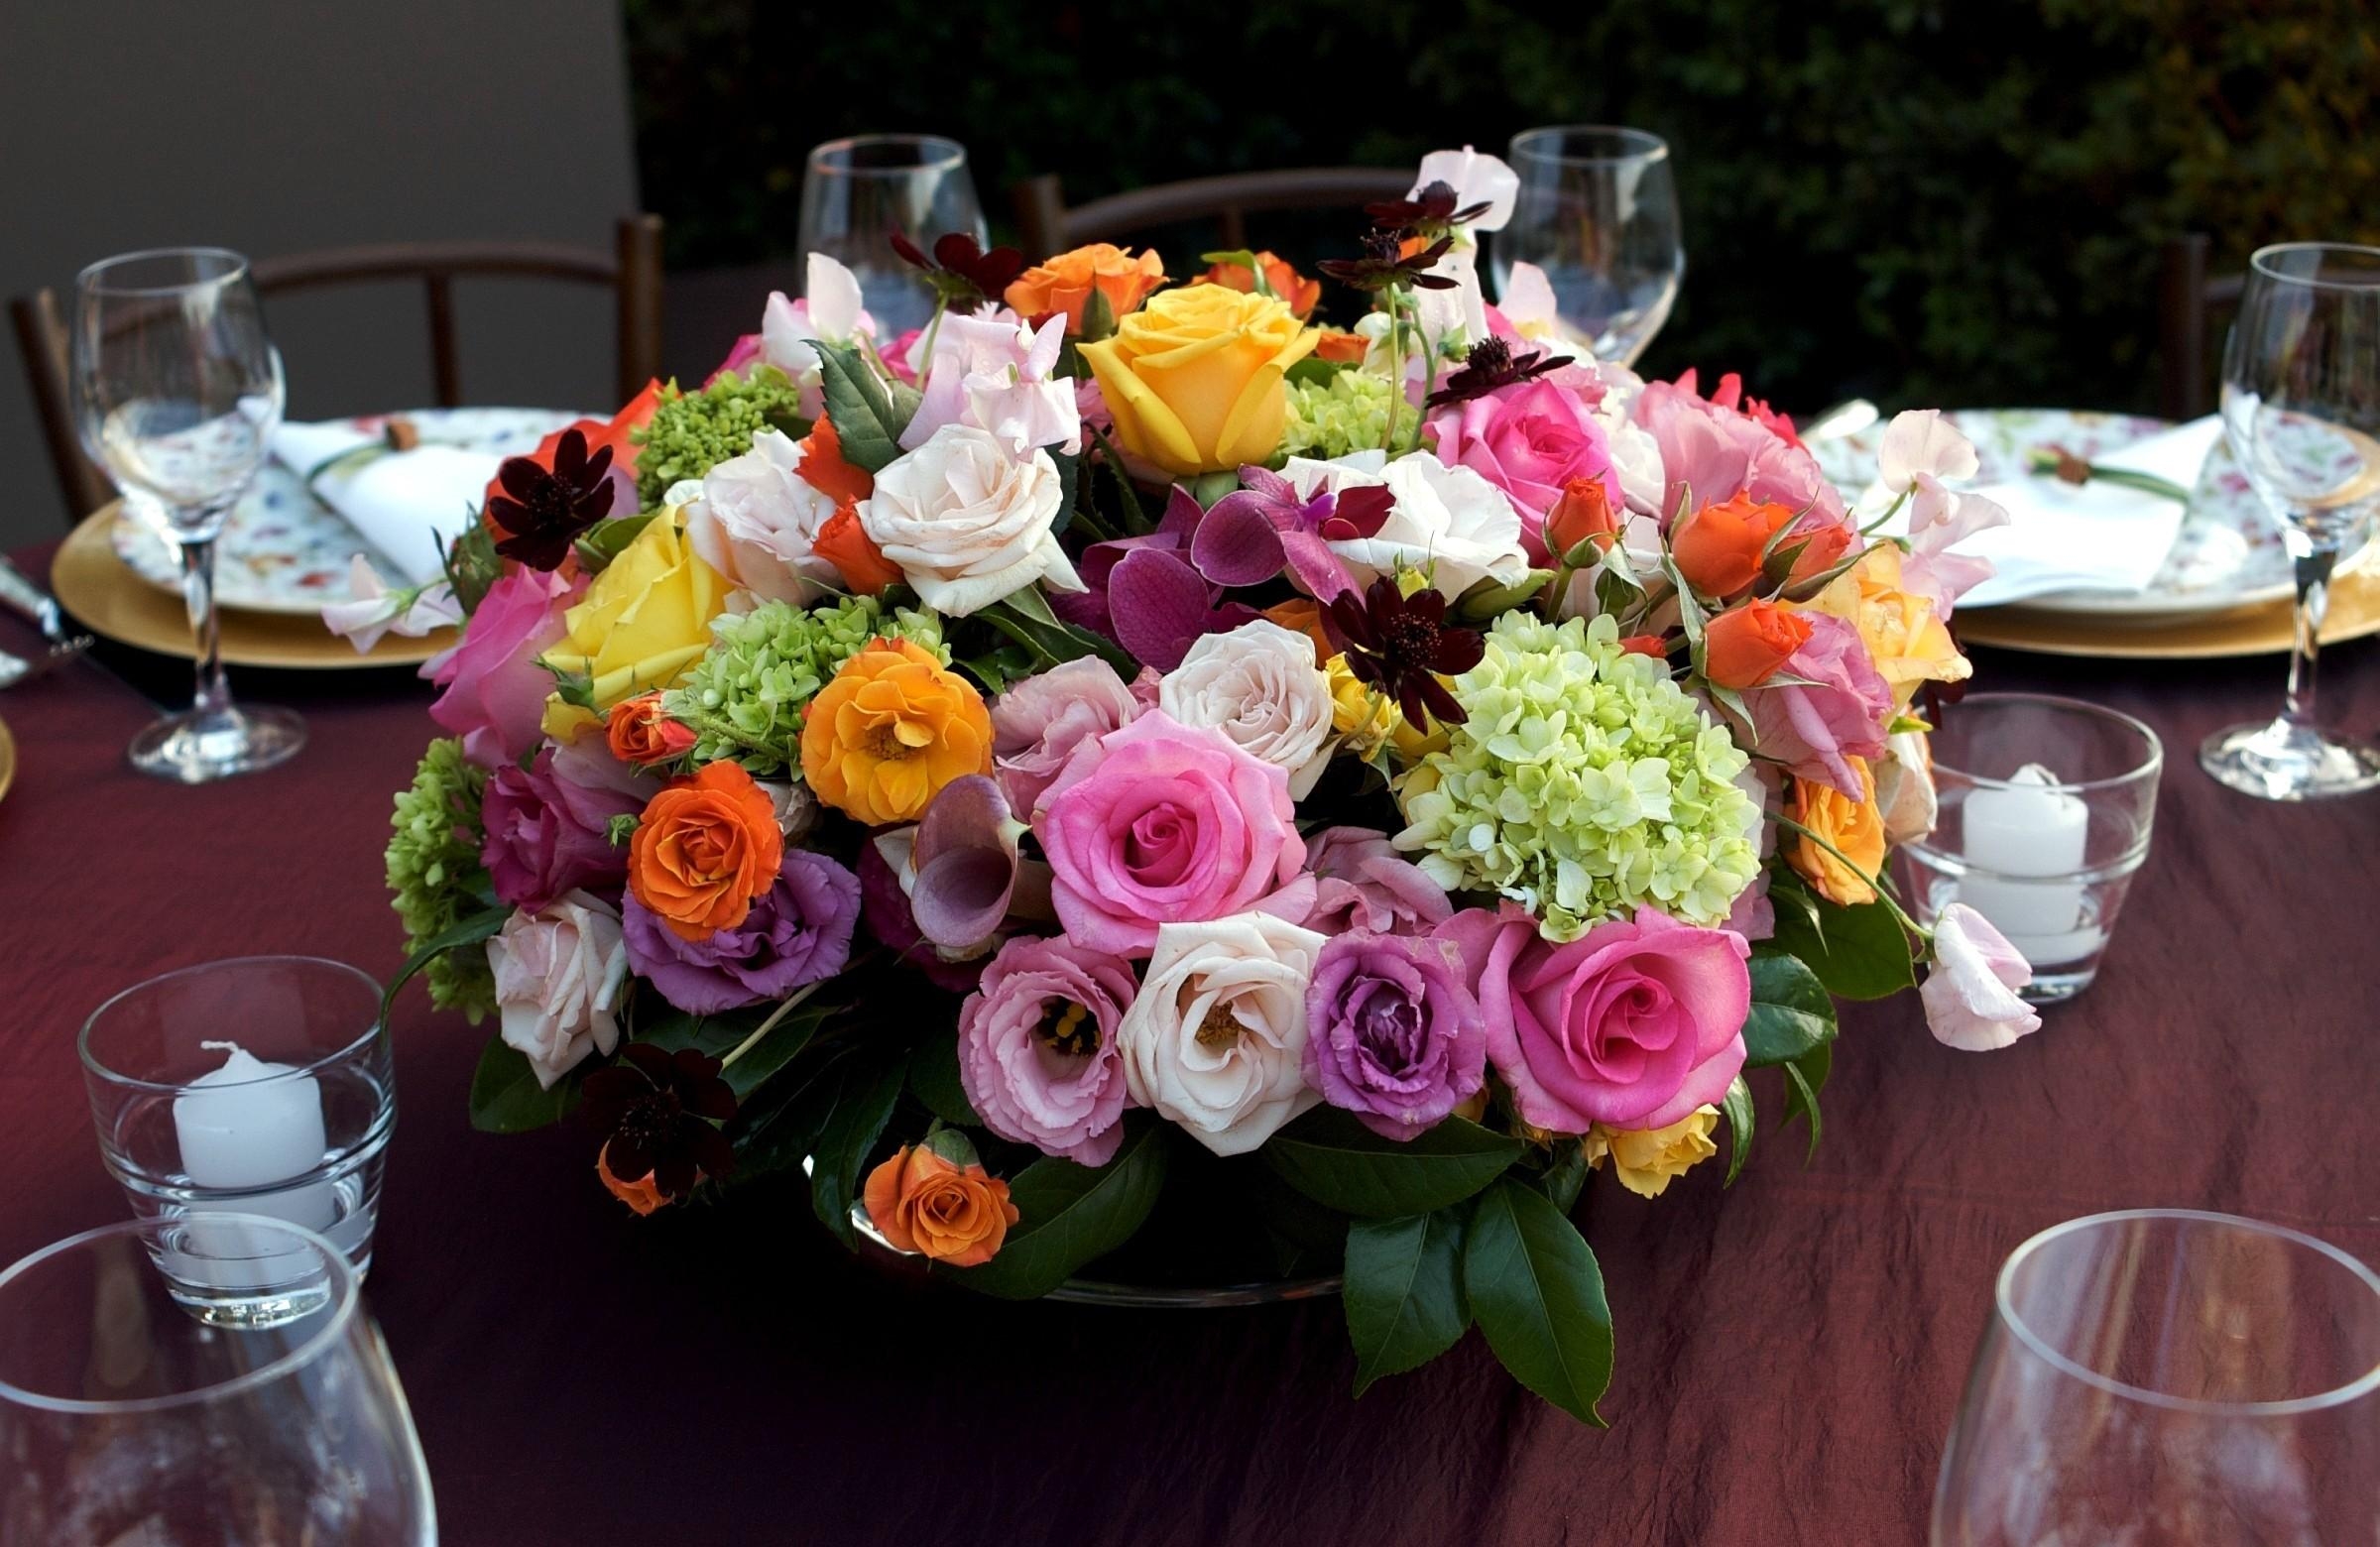 roses, flowers, candles, bouquet, table, composition, hydrangea, serving, lisianthus russell, lisiantus russell